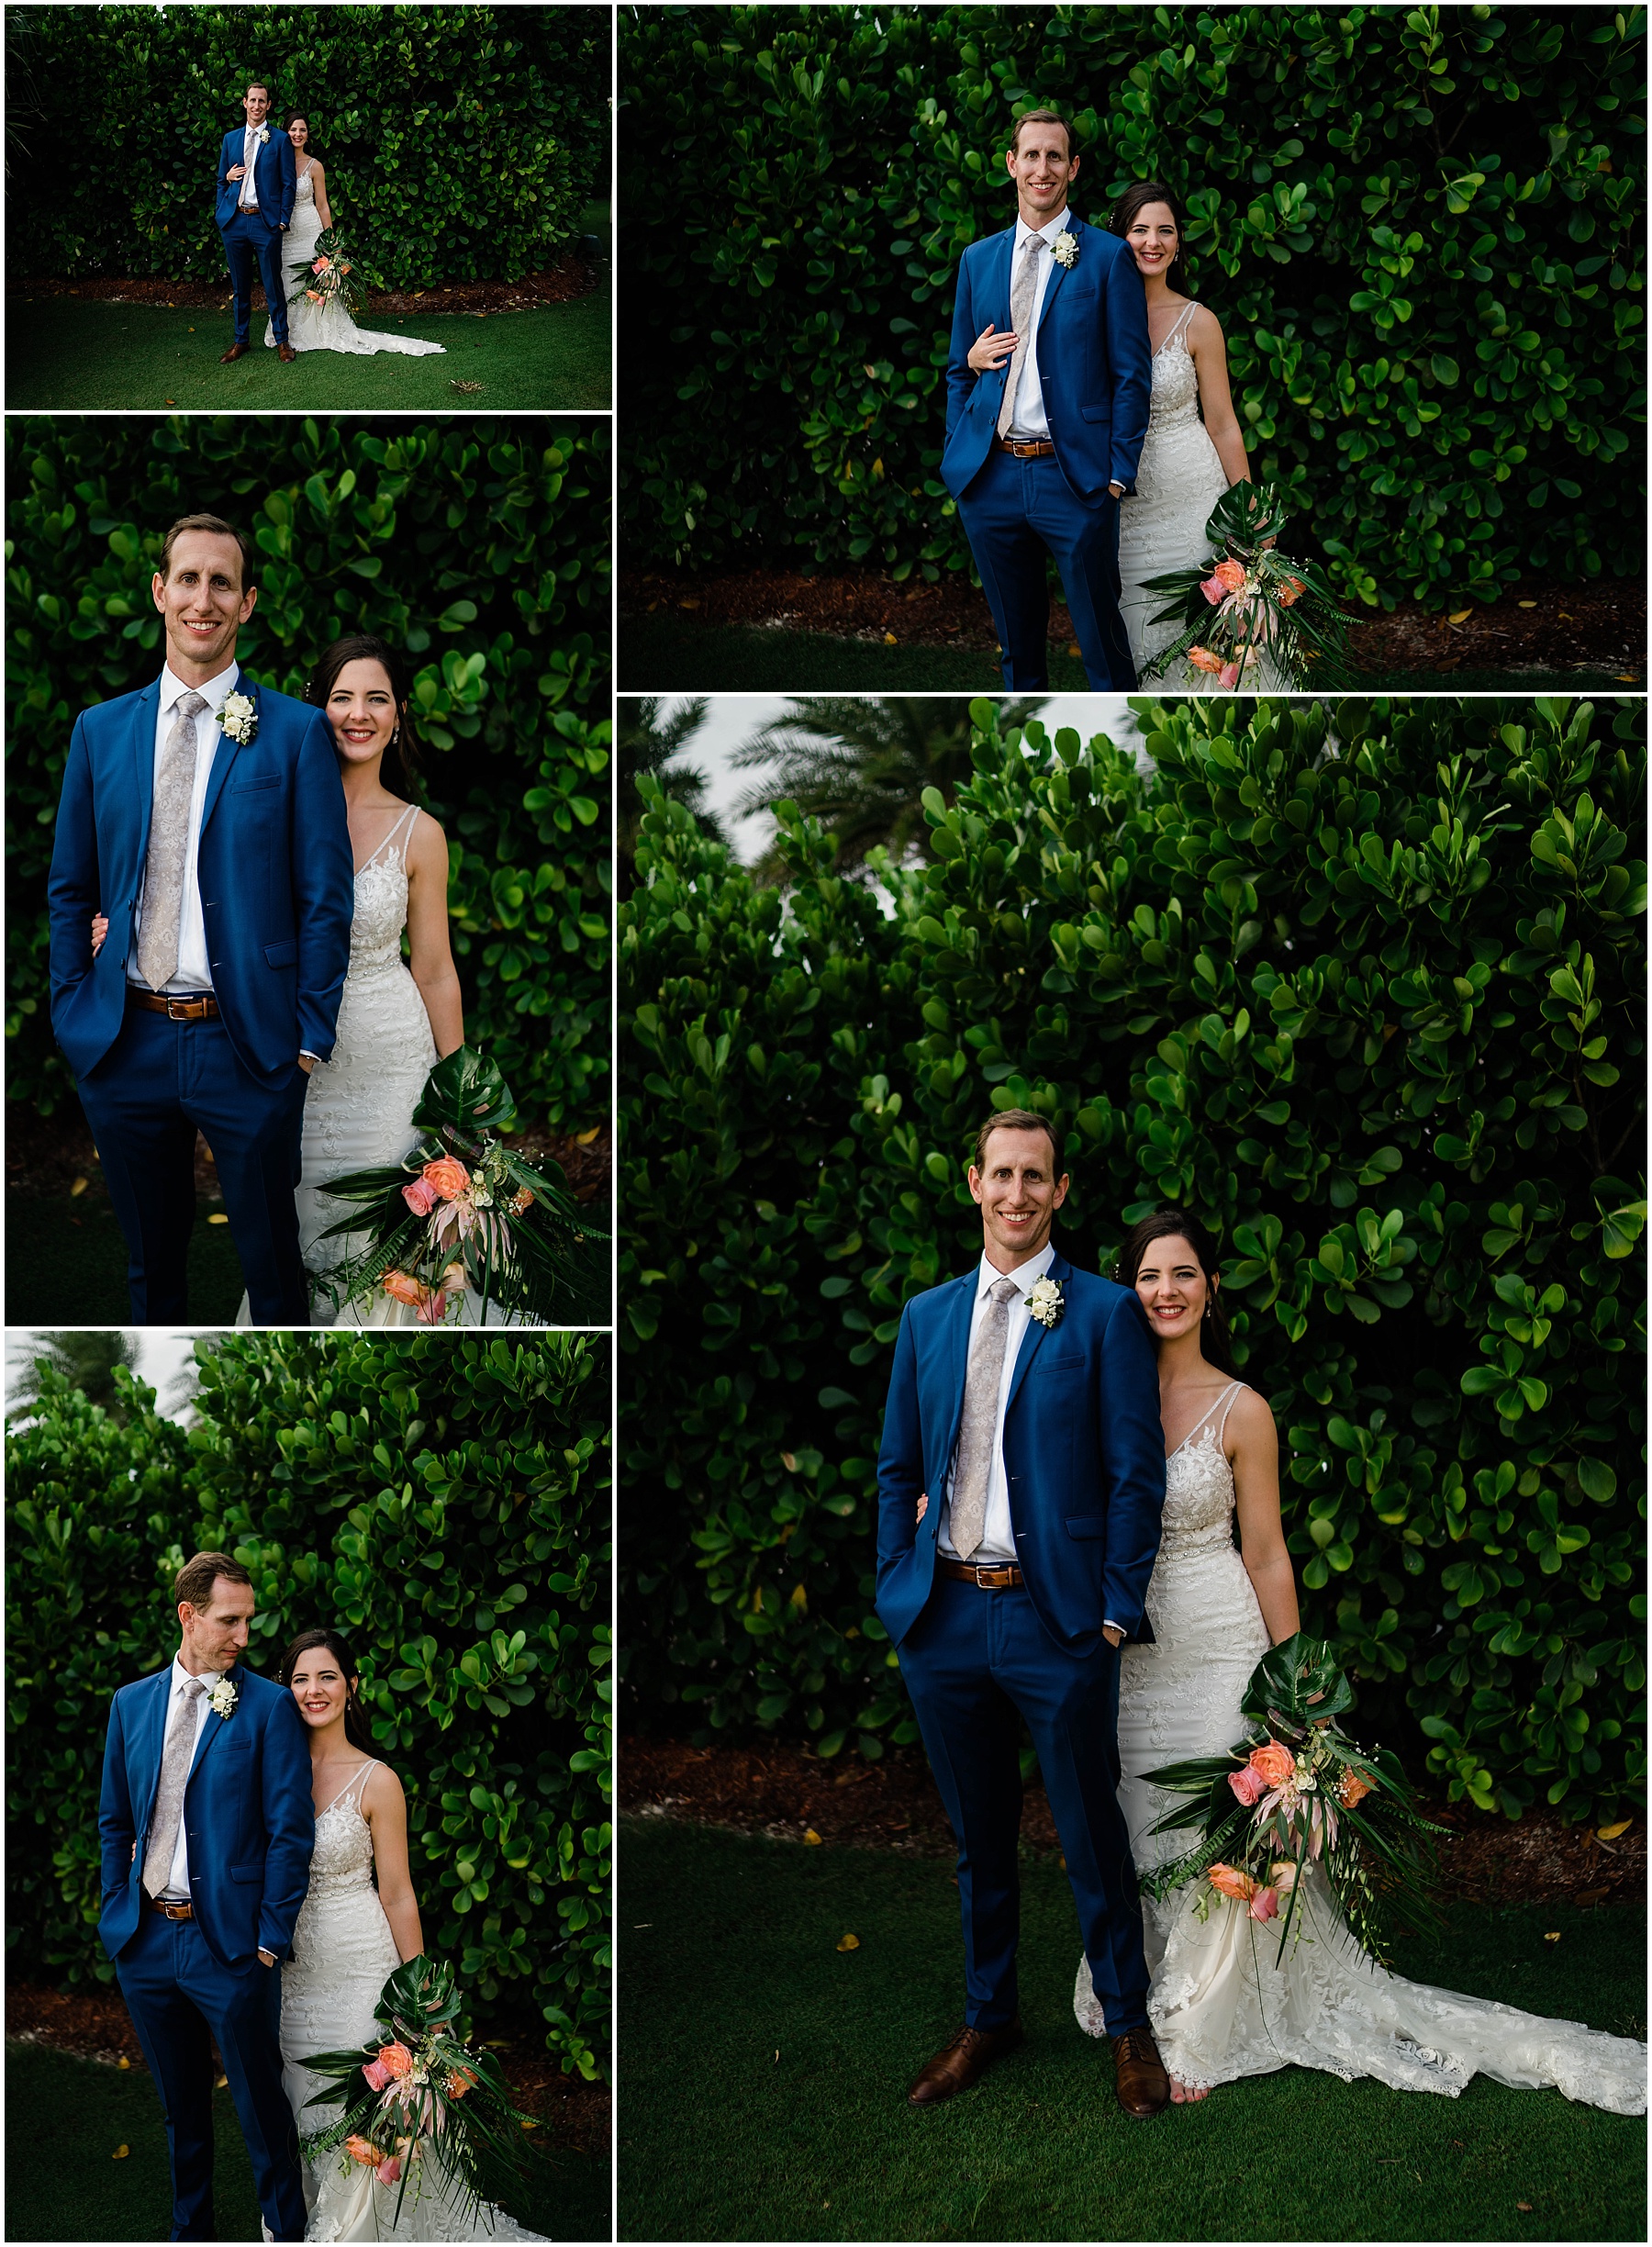 Bride and groom pose in greenery at JW Marriott Marco Island in Florida.